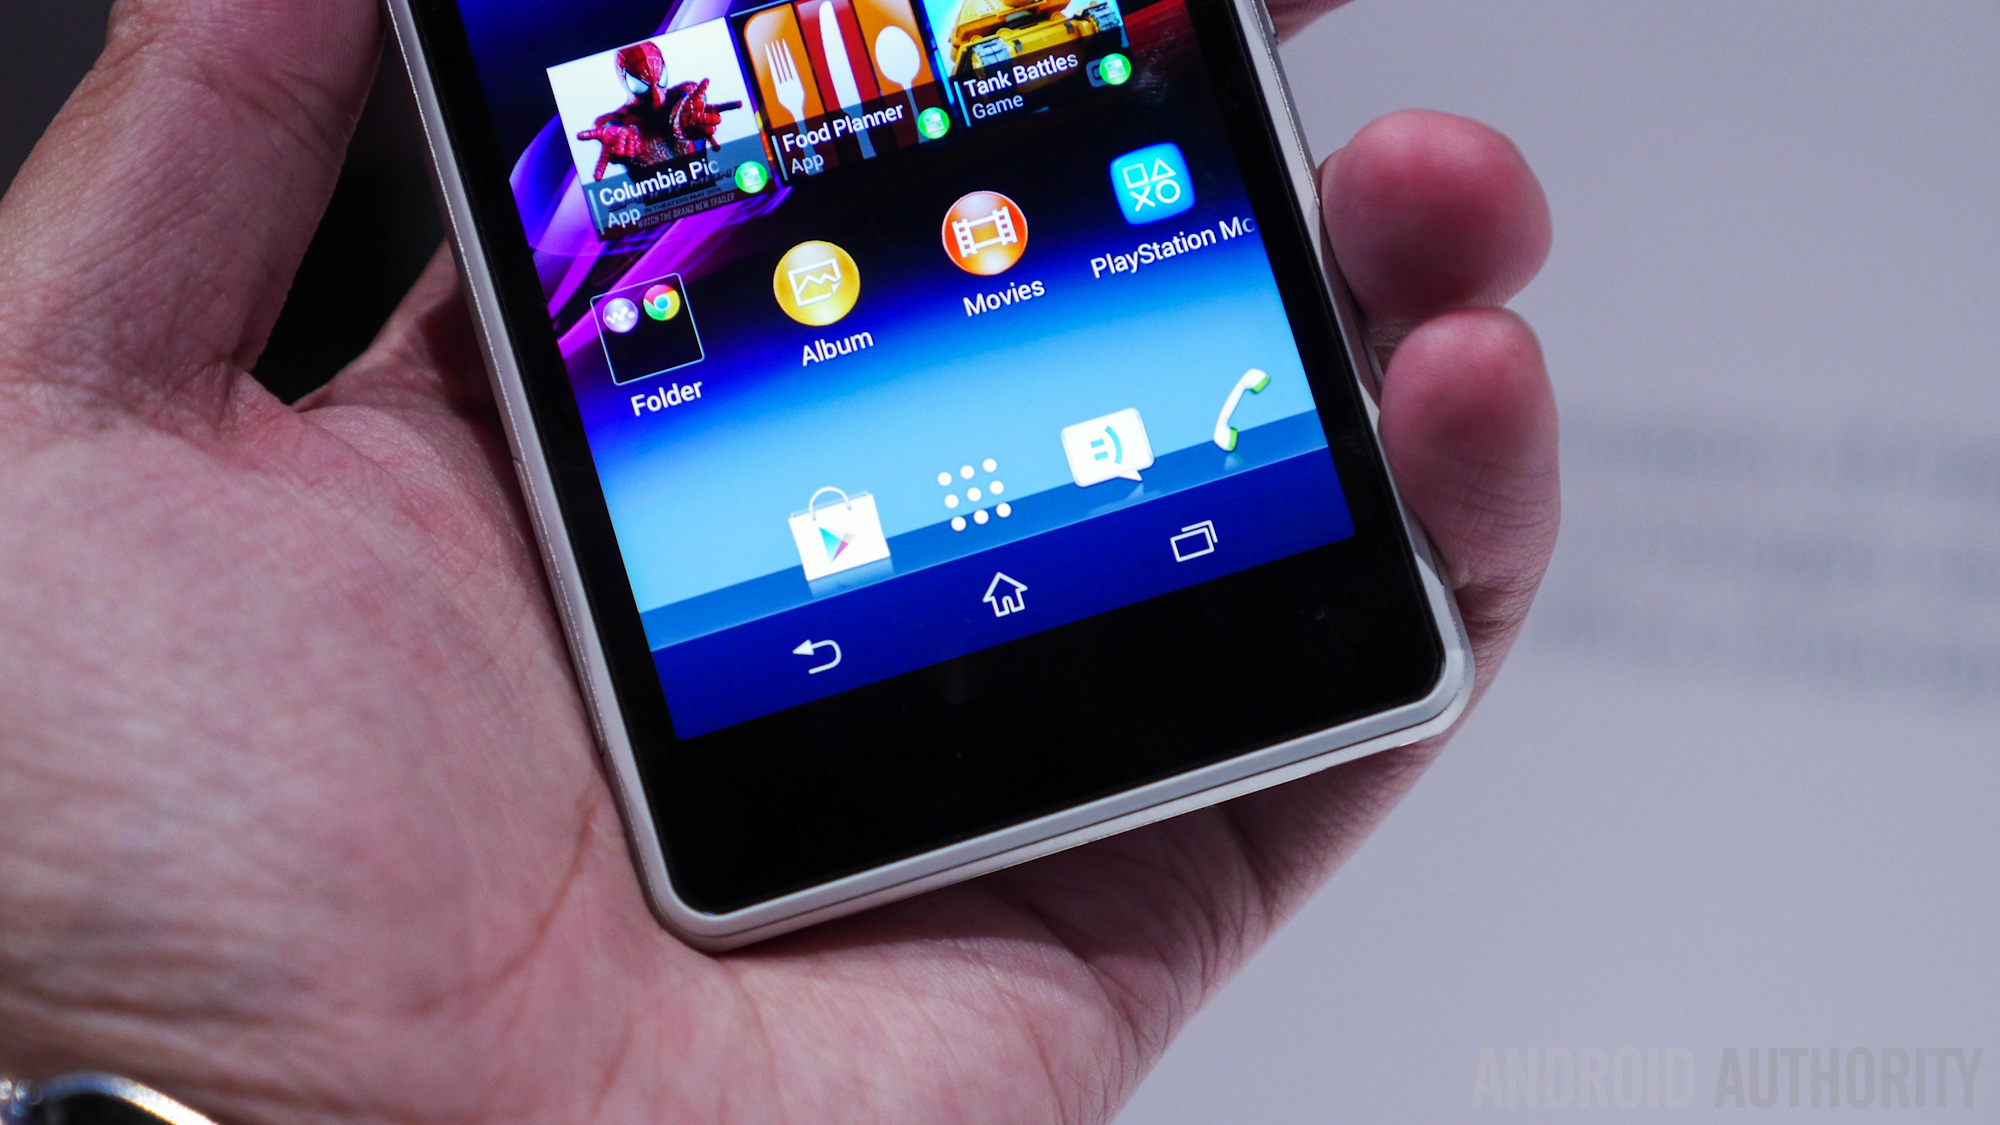 Sony Xperia Z1 Compact Z1 mini hands on AA -6